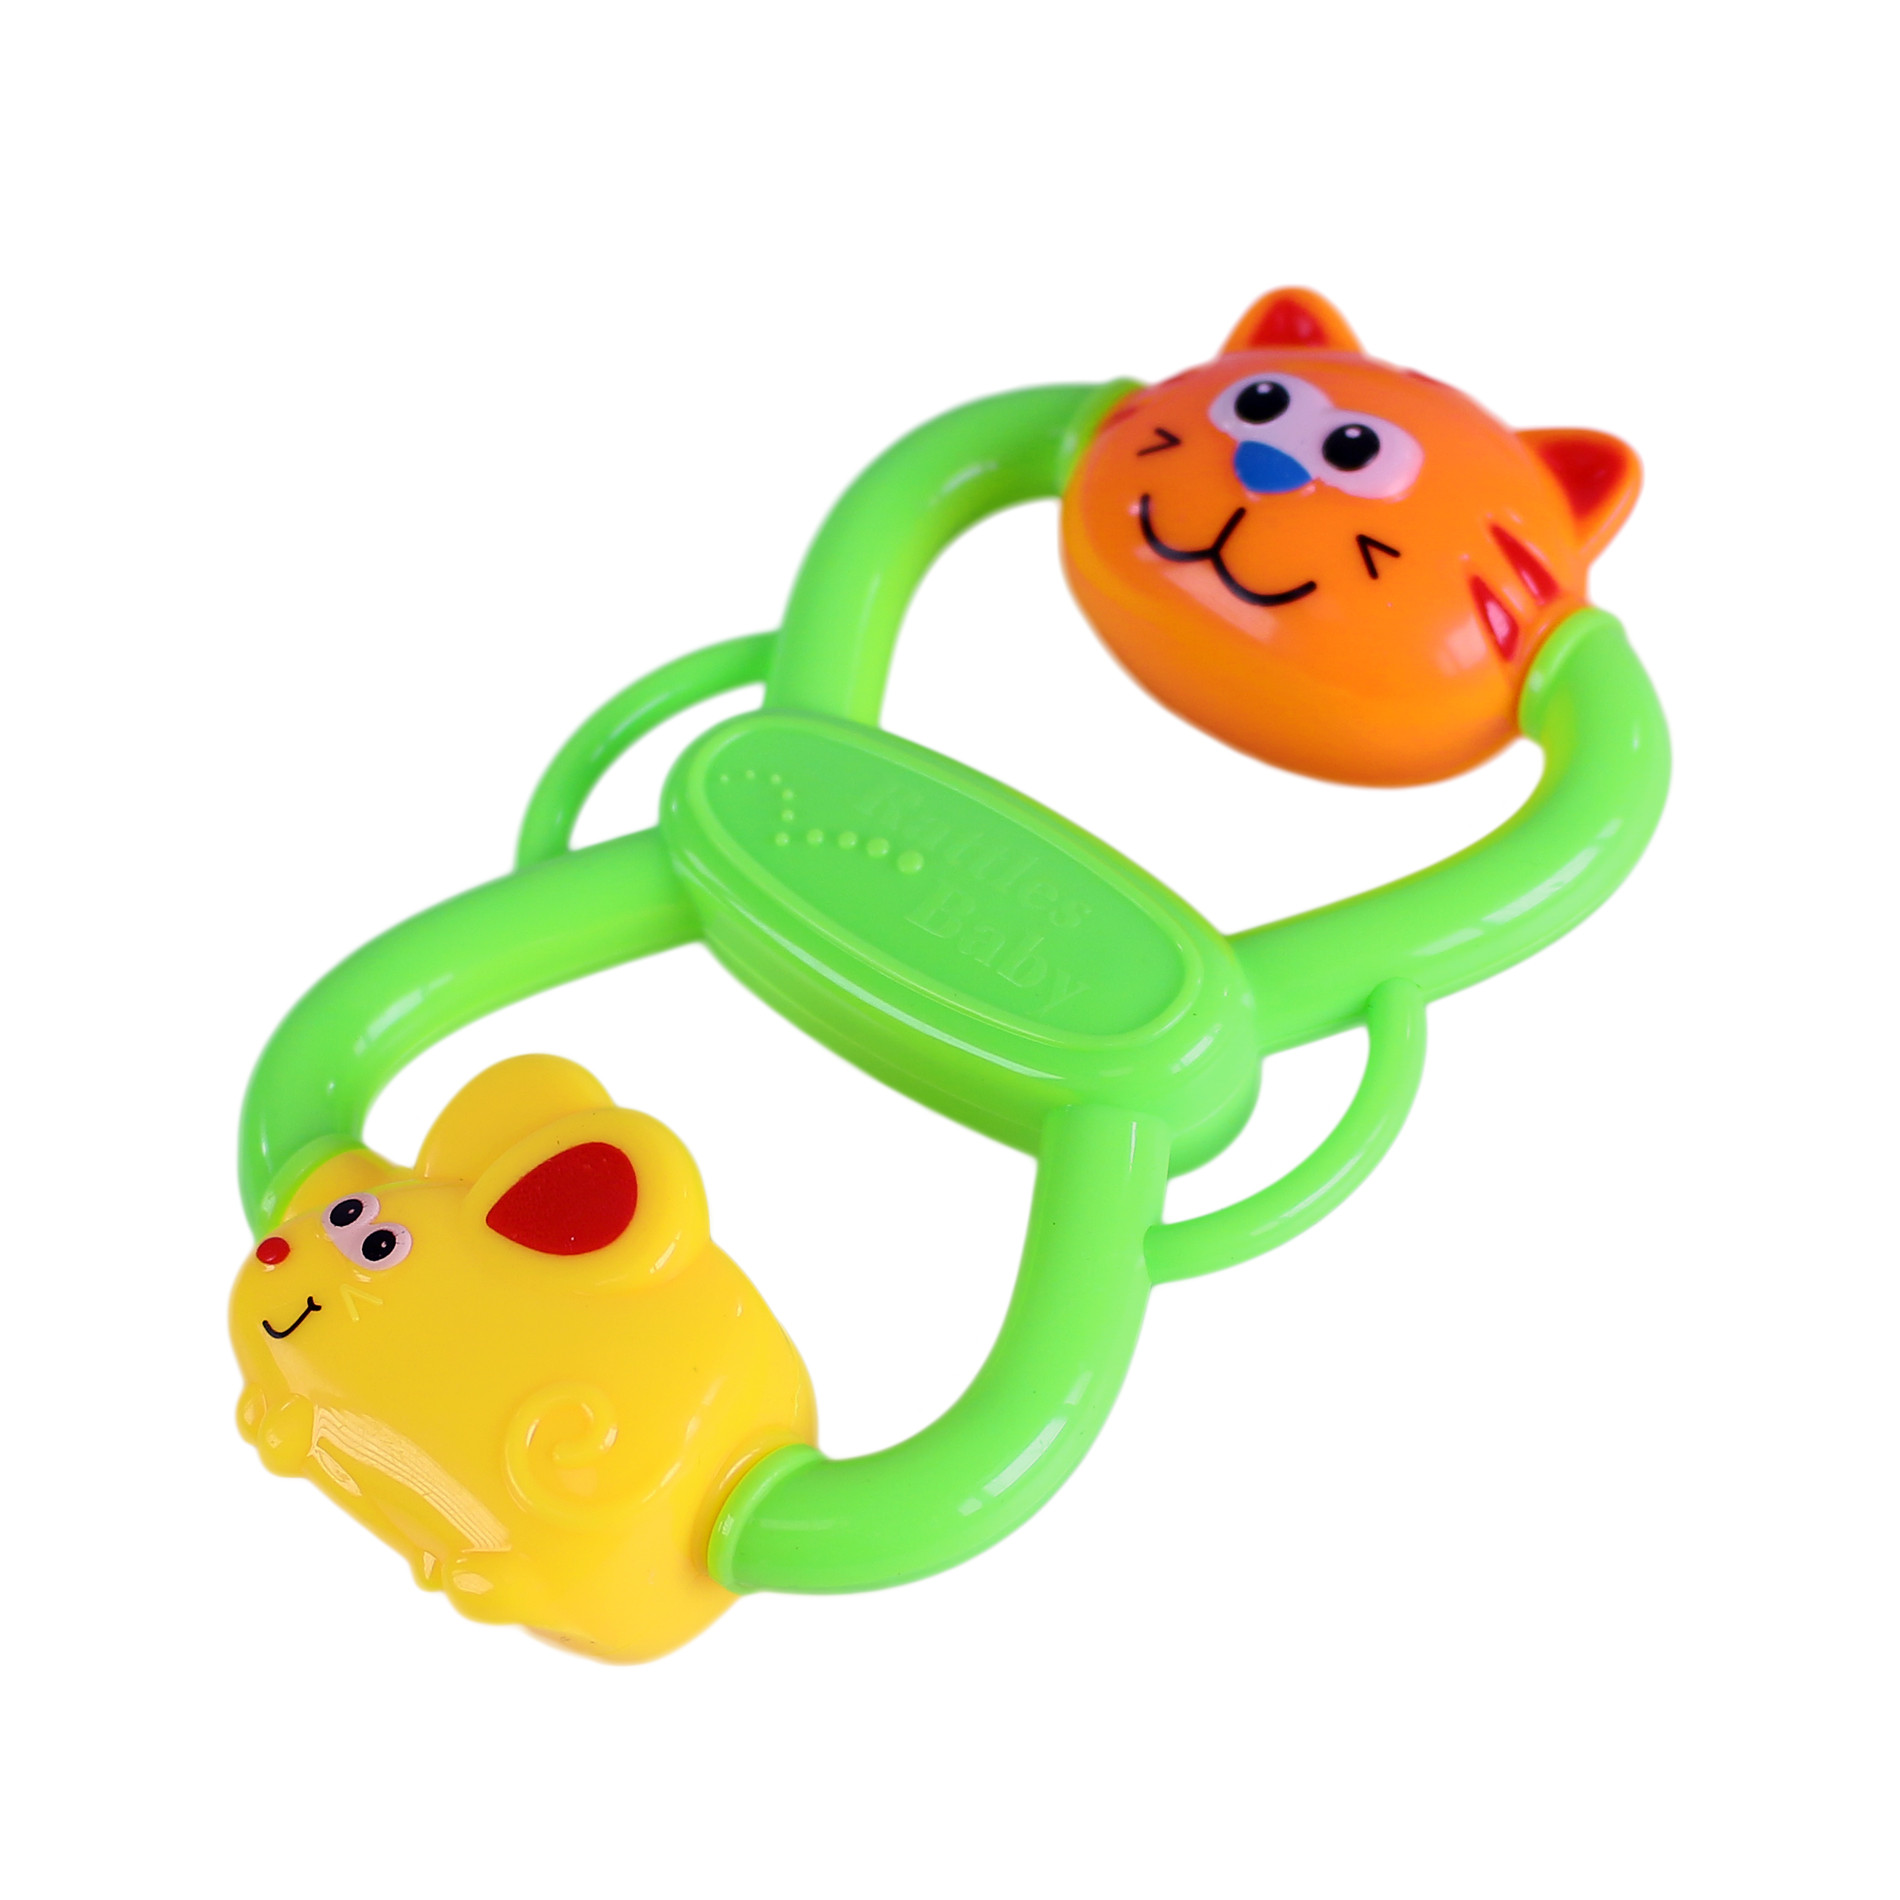 the Cat and mouse rattle